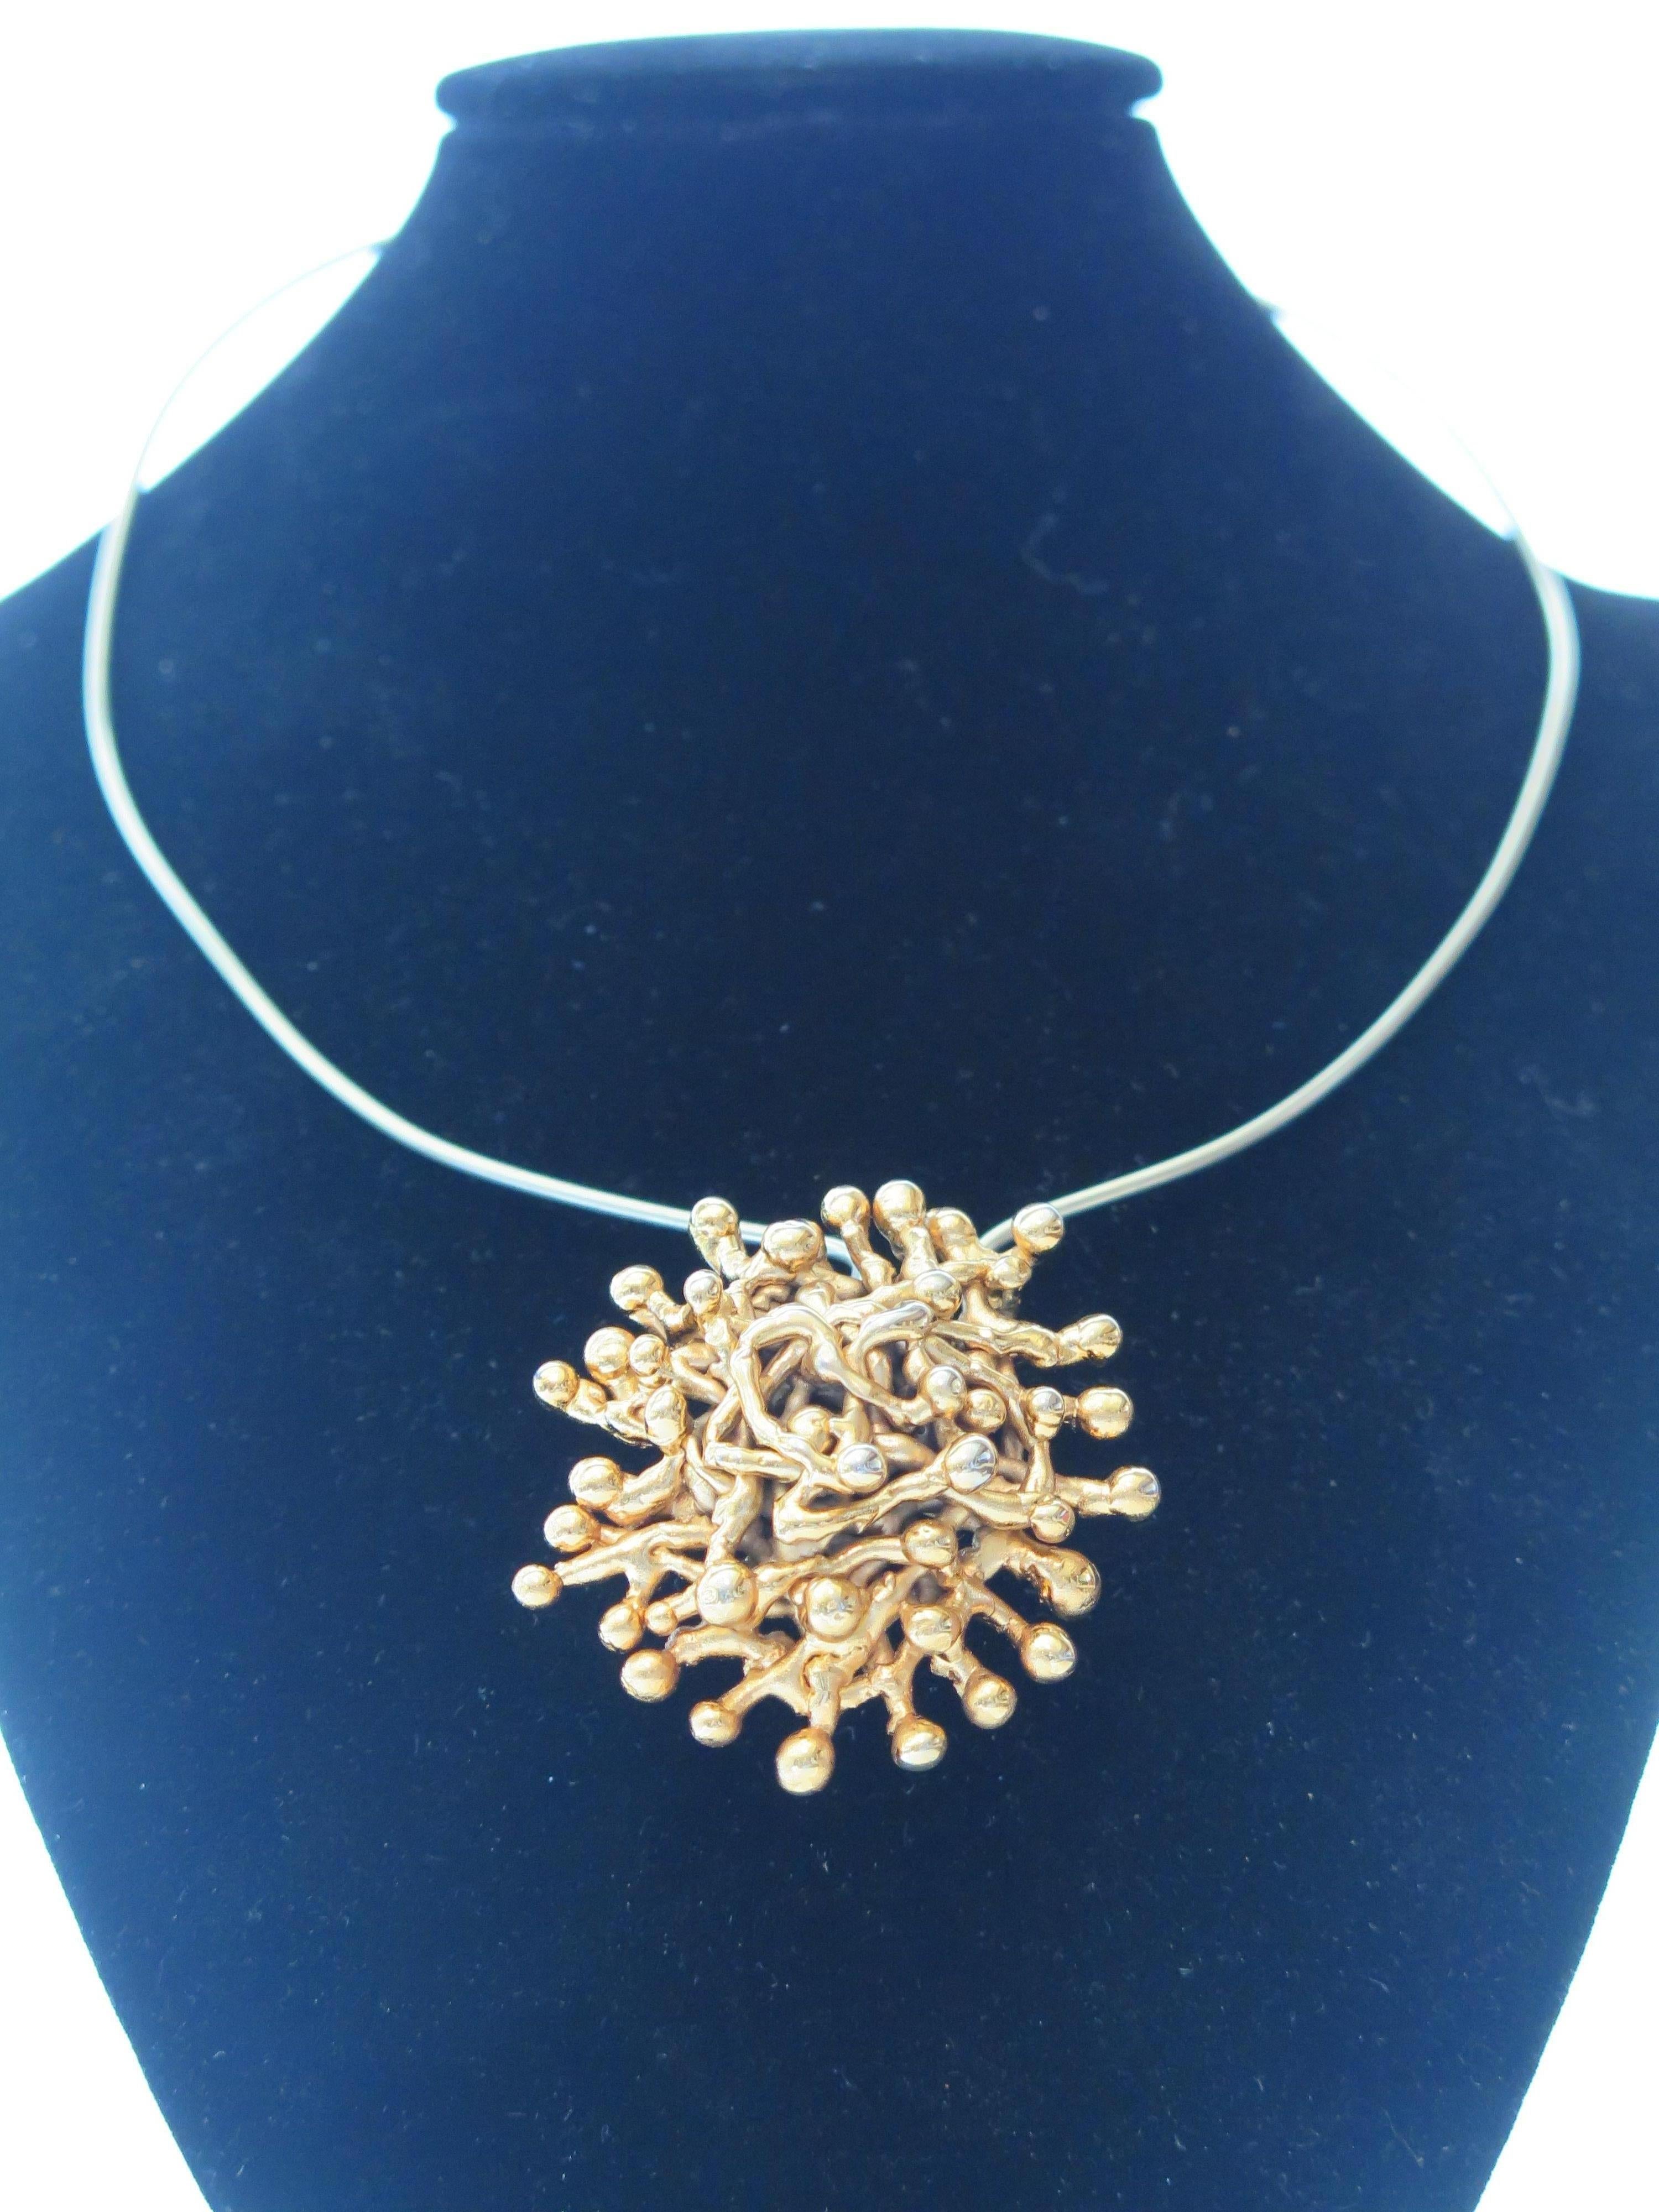 Modernist Gold on Bronze Pendant Necklace by Ibram Lassaw For Sale 1